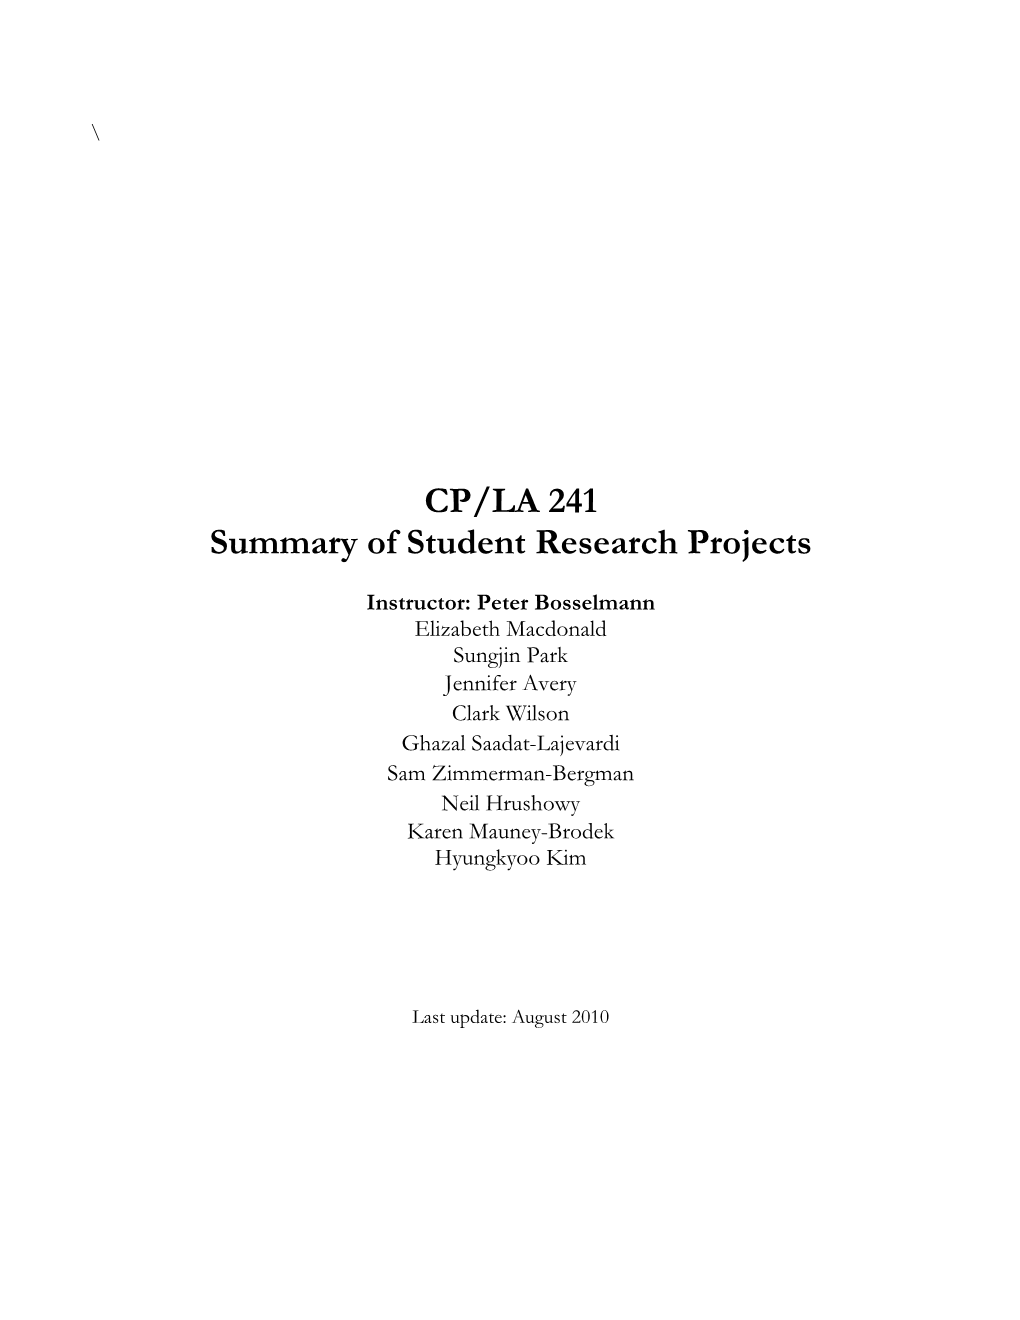 CP/LA 241 Summary of Student Research Projects